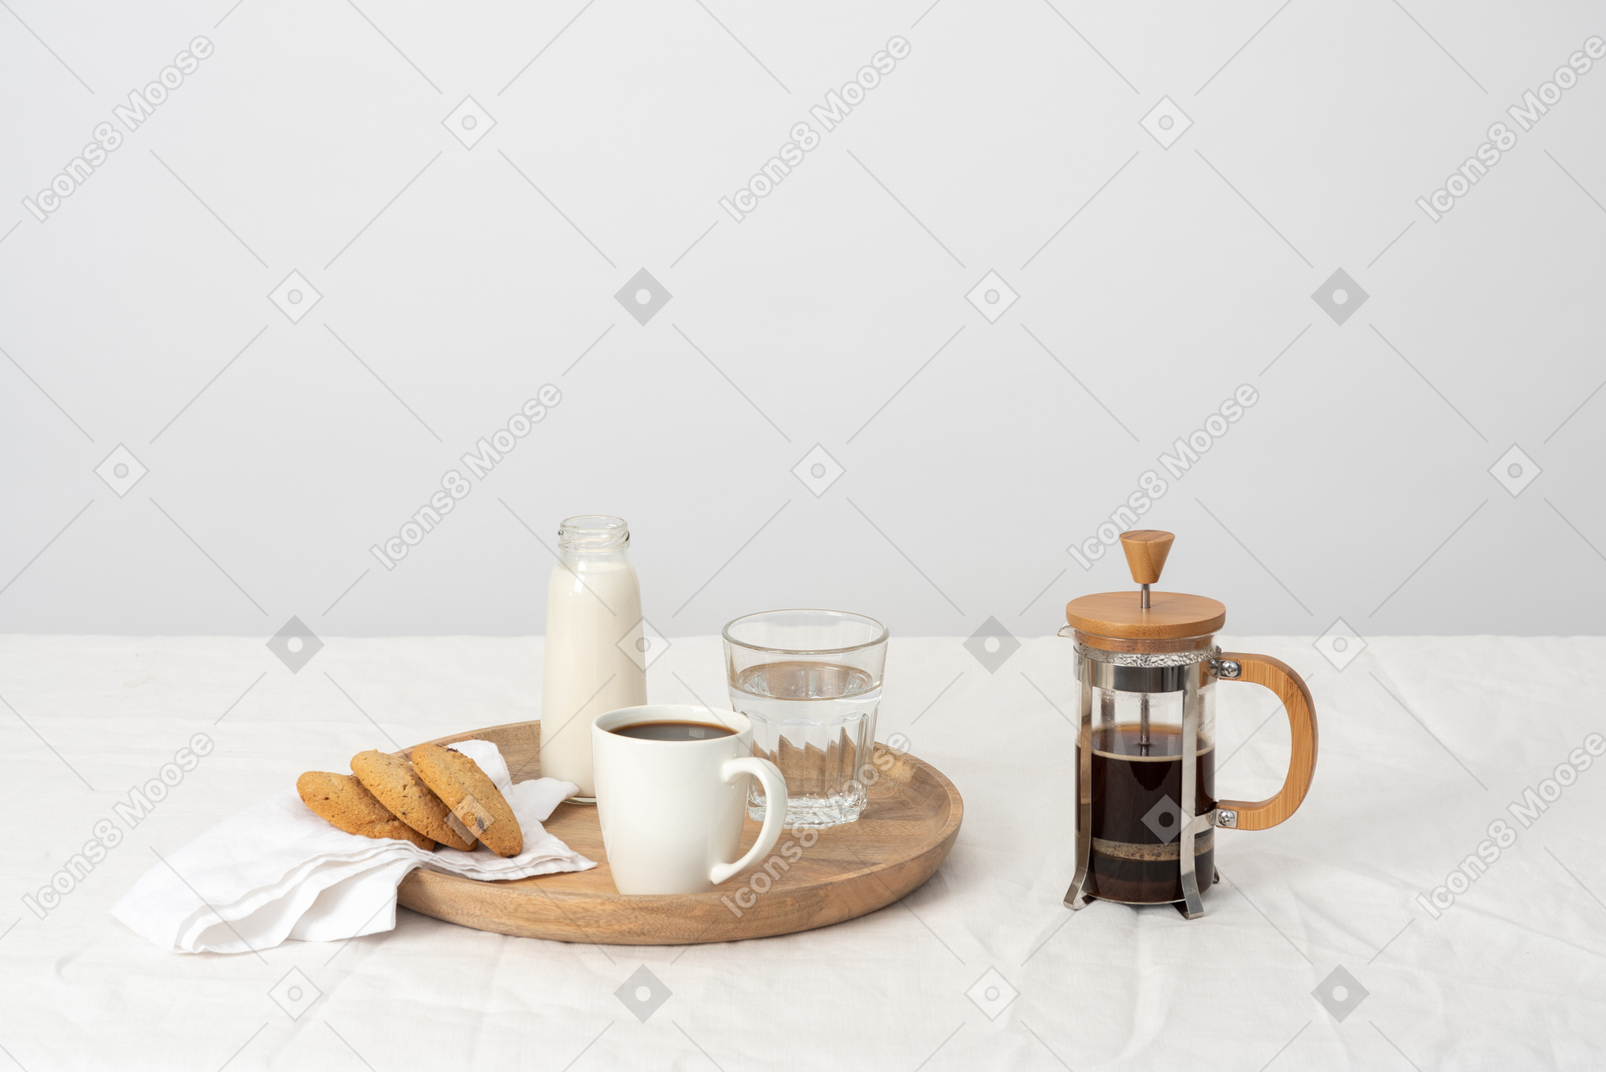 Coffee in french press and large cup of coffee, glass of water, milk and some cookies on the tray